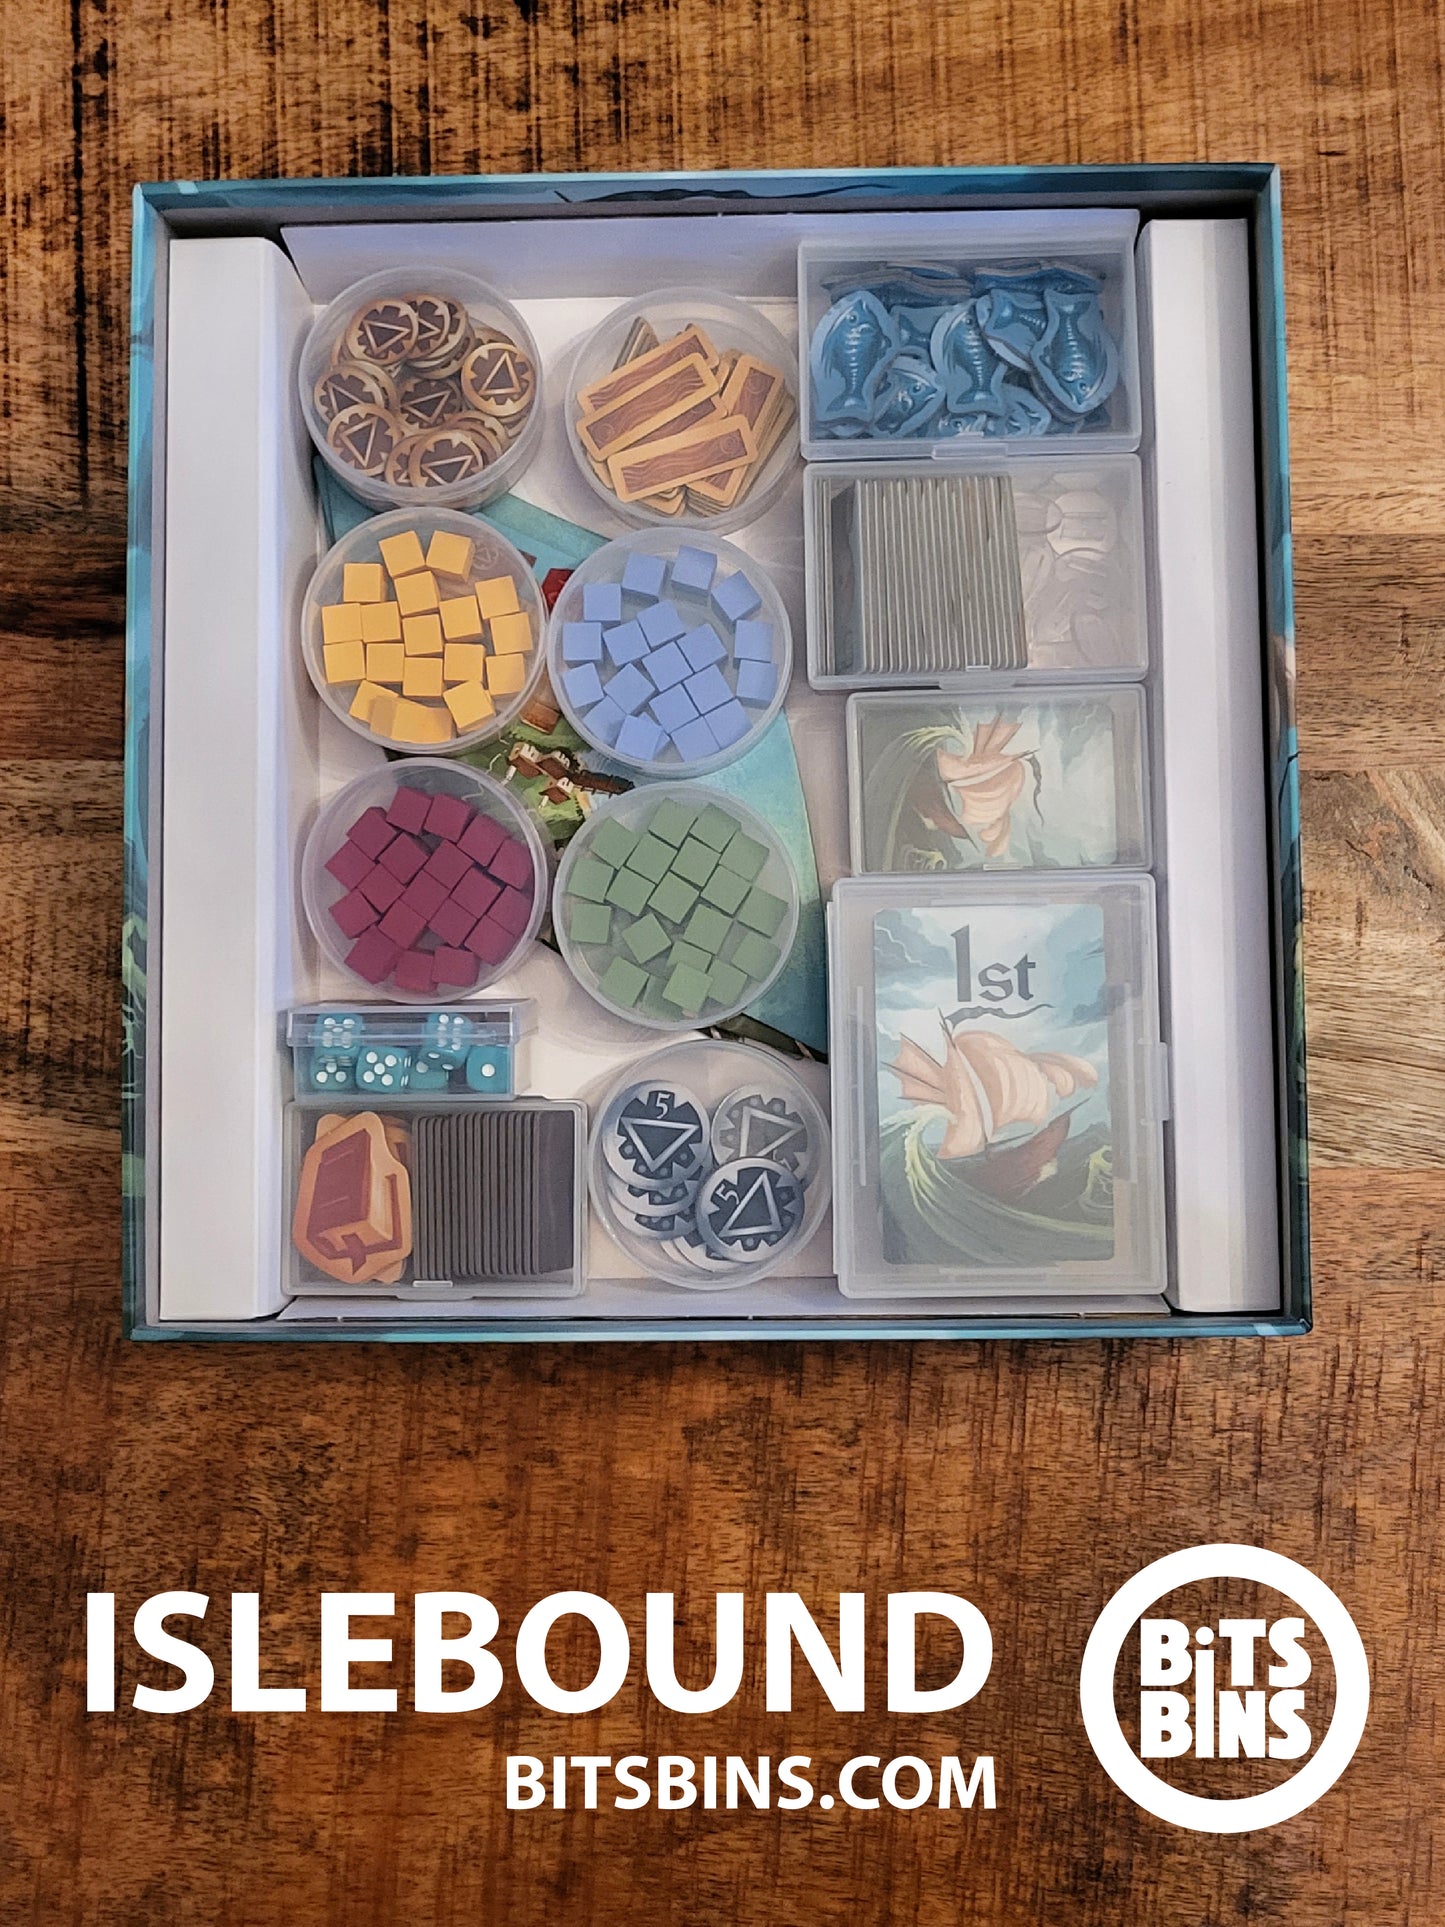 RECOMMENDED Bitsbins Islebound - 7 Pods, 1 Mini, 2 Originals, 2 XLs, 2 Card Boxes